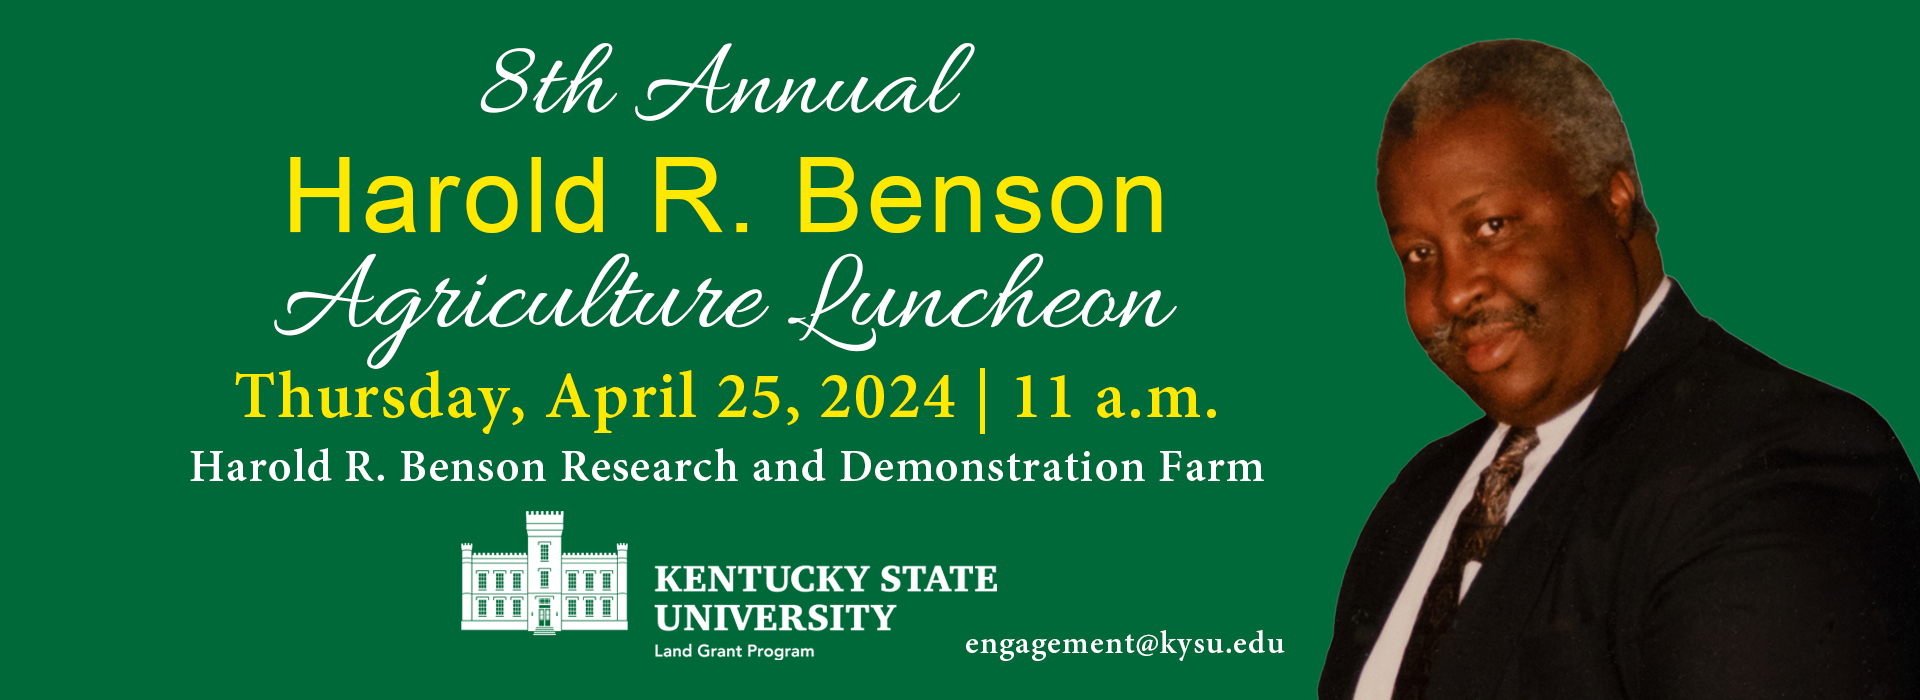 8th Annual Benson Agriculture Luncheon